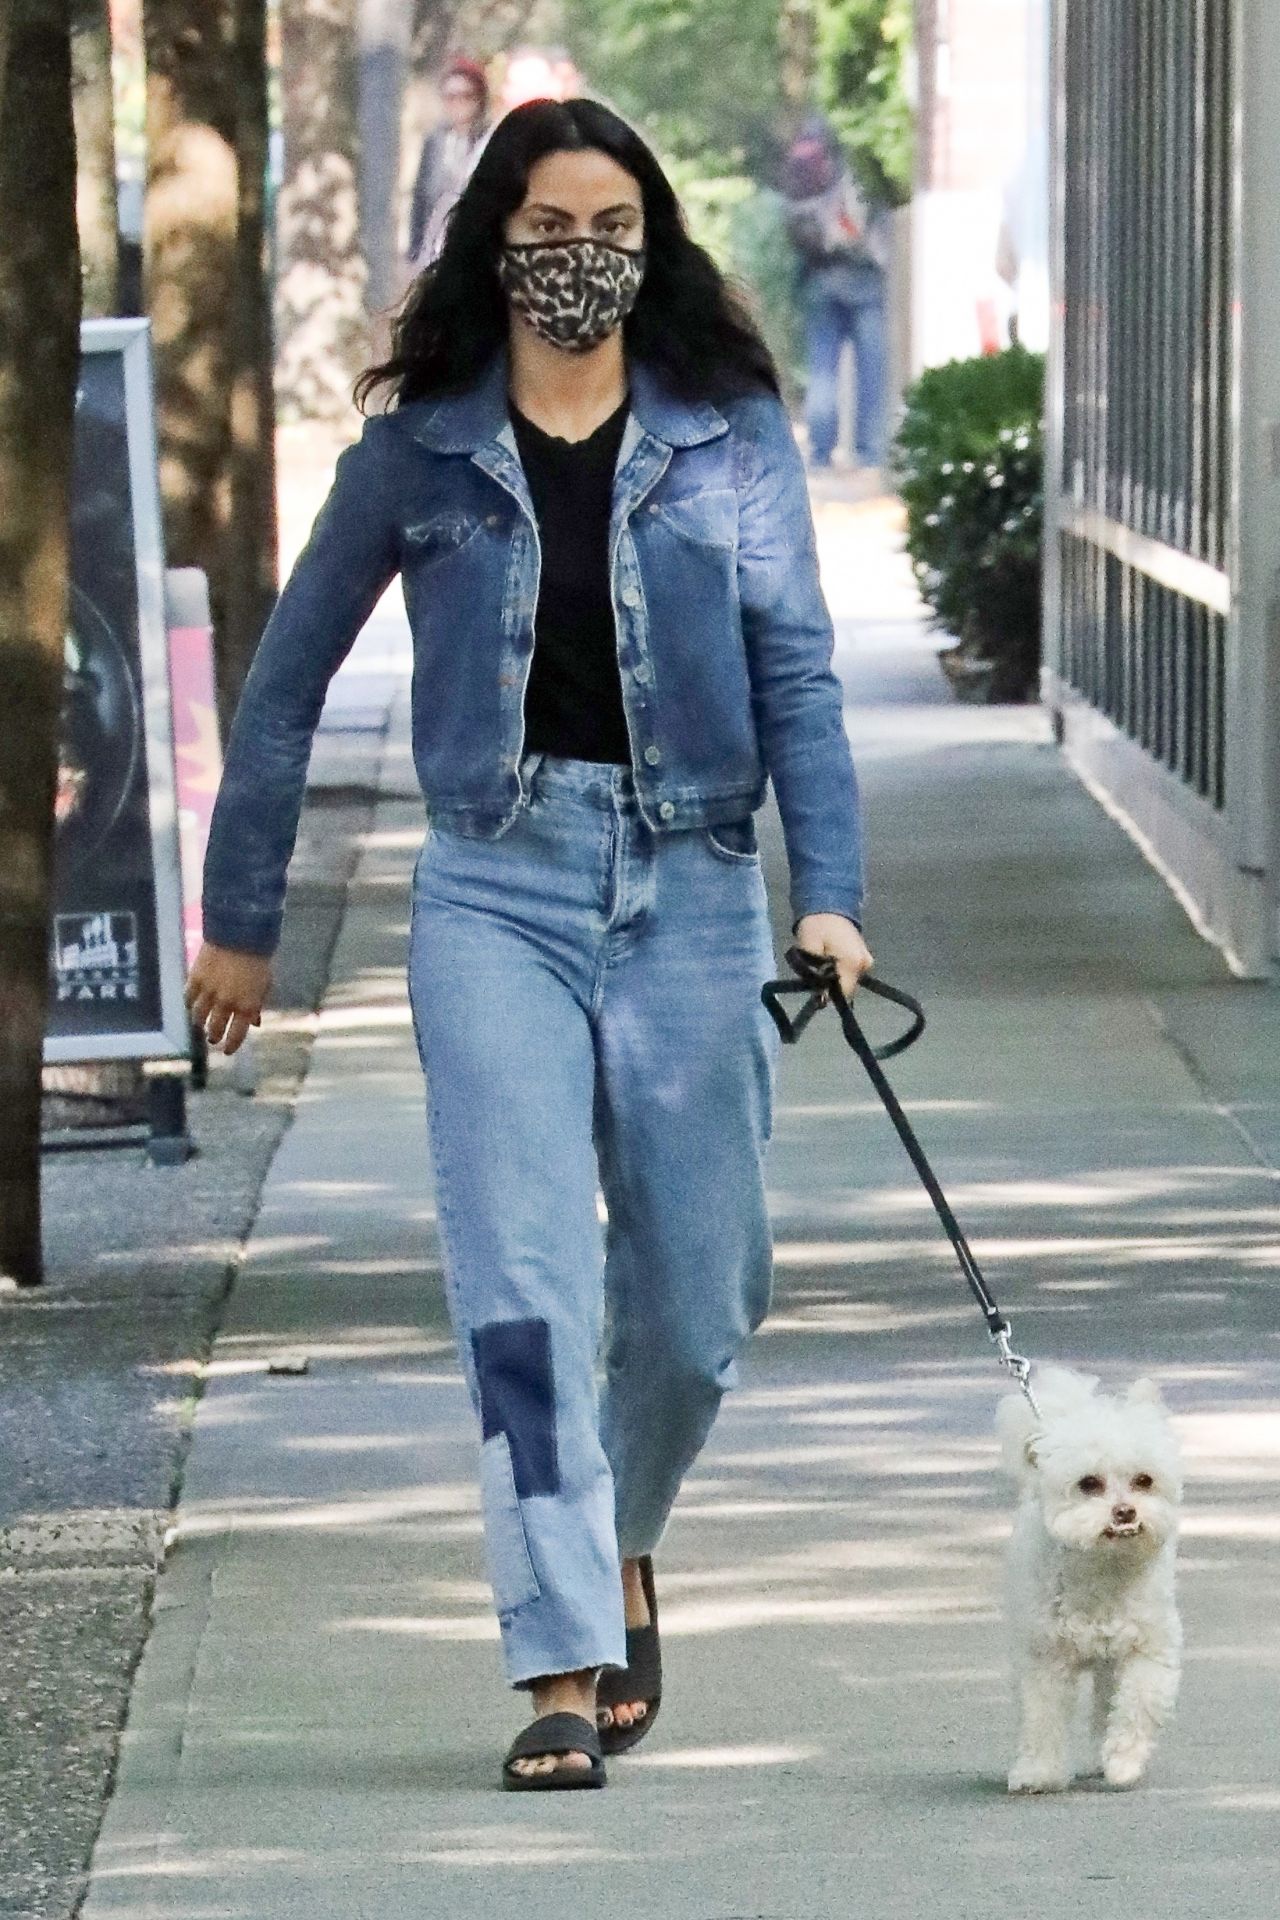 camila-mendes-in-casual-outfit-vancouver-10-02-2020-6.jpg